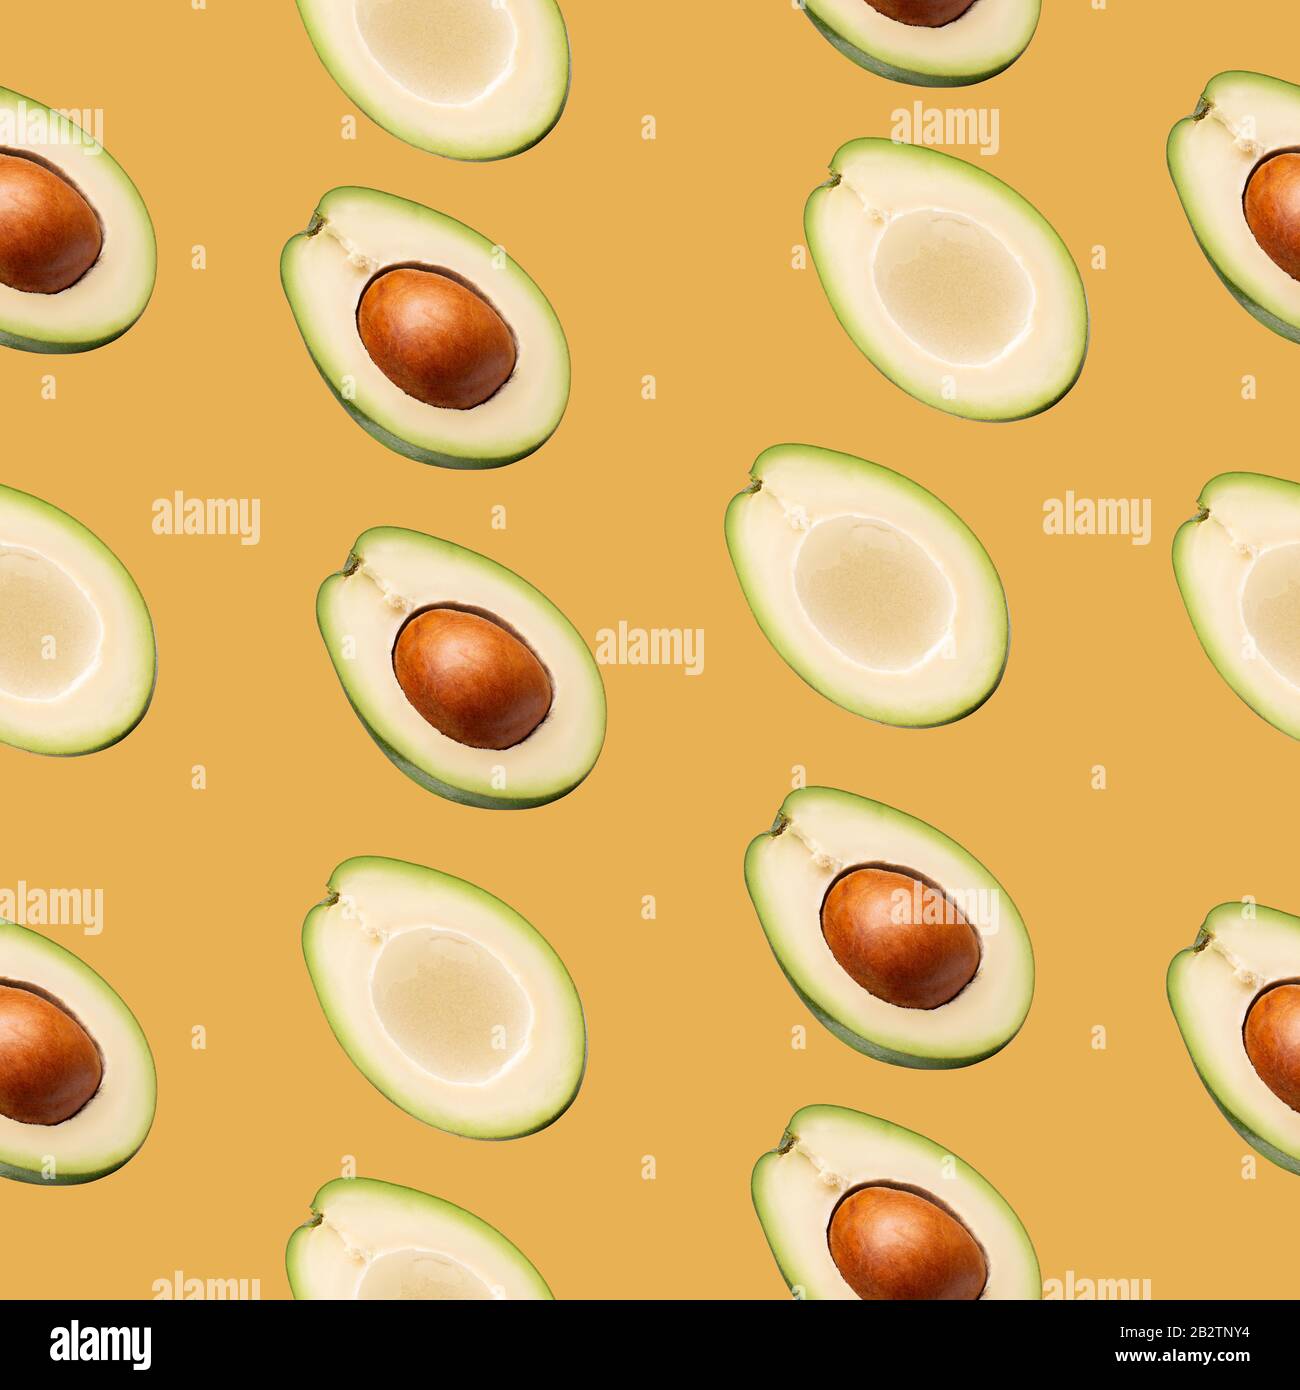 pattern with avocado slices on a yellow background. Stock Photo